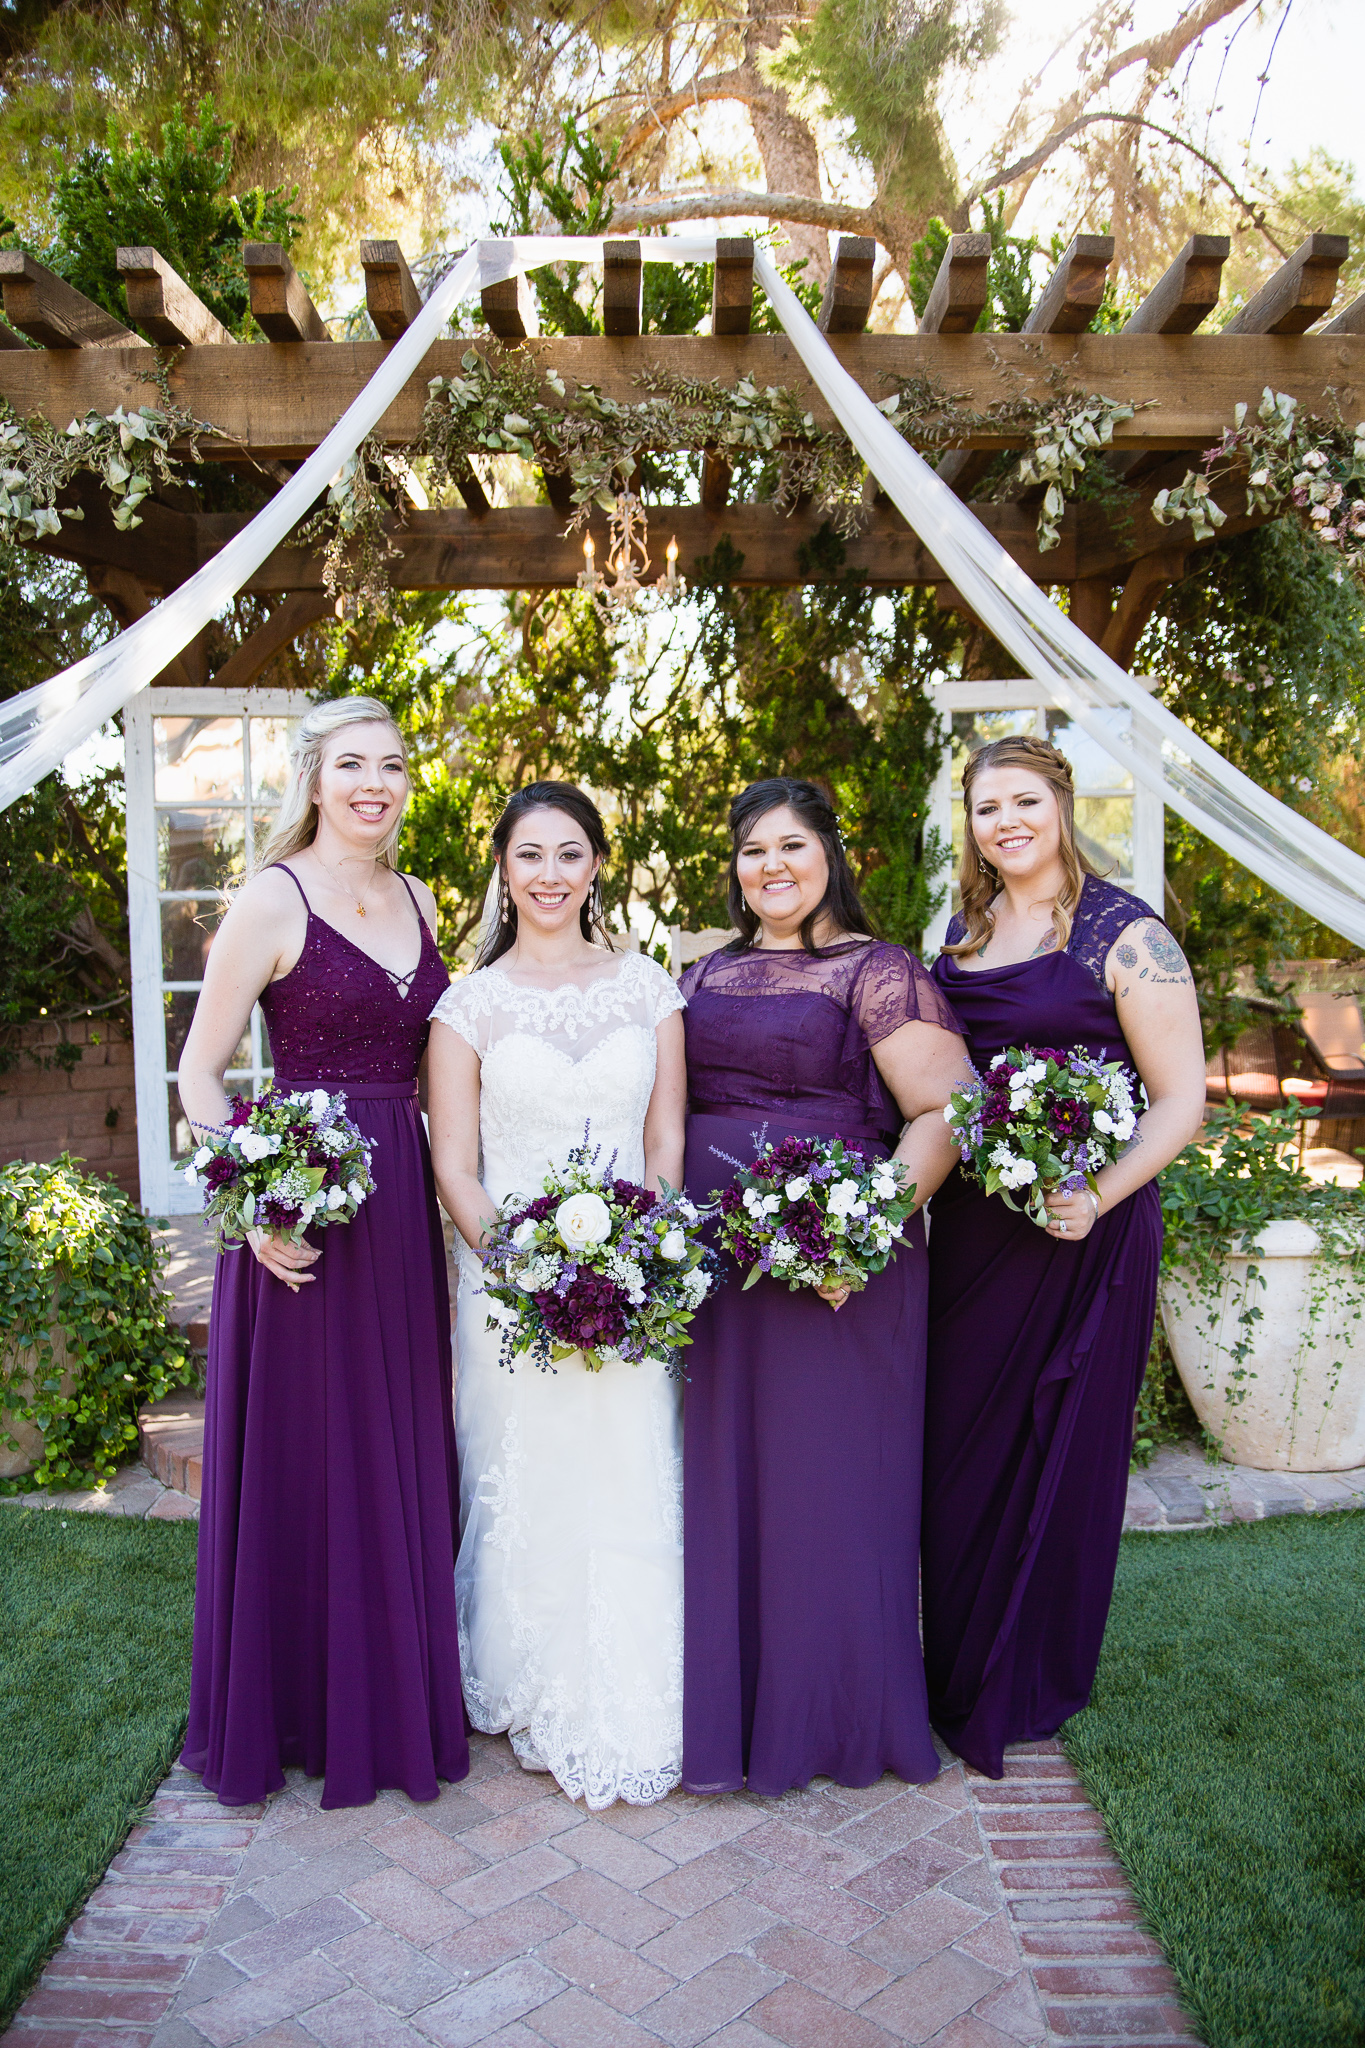 Bride with bridesmaids in purple mismatched bridesmaids dresses by Arizona wedding photographer PMA Photography.